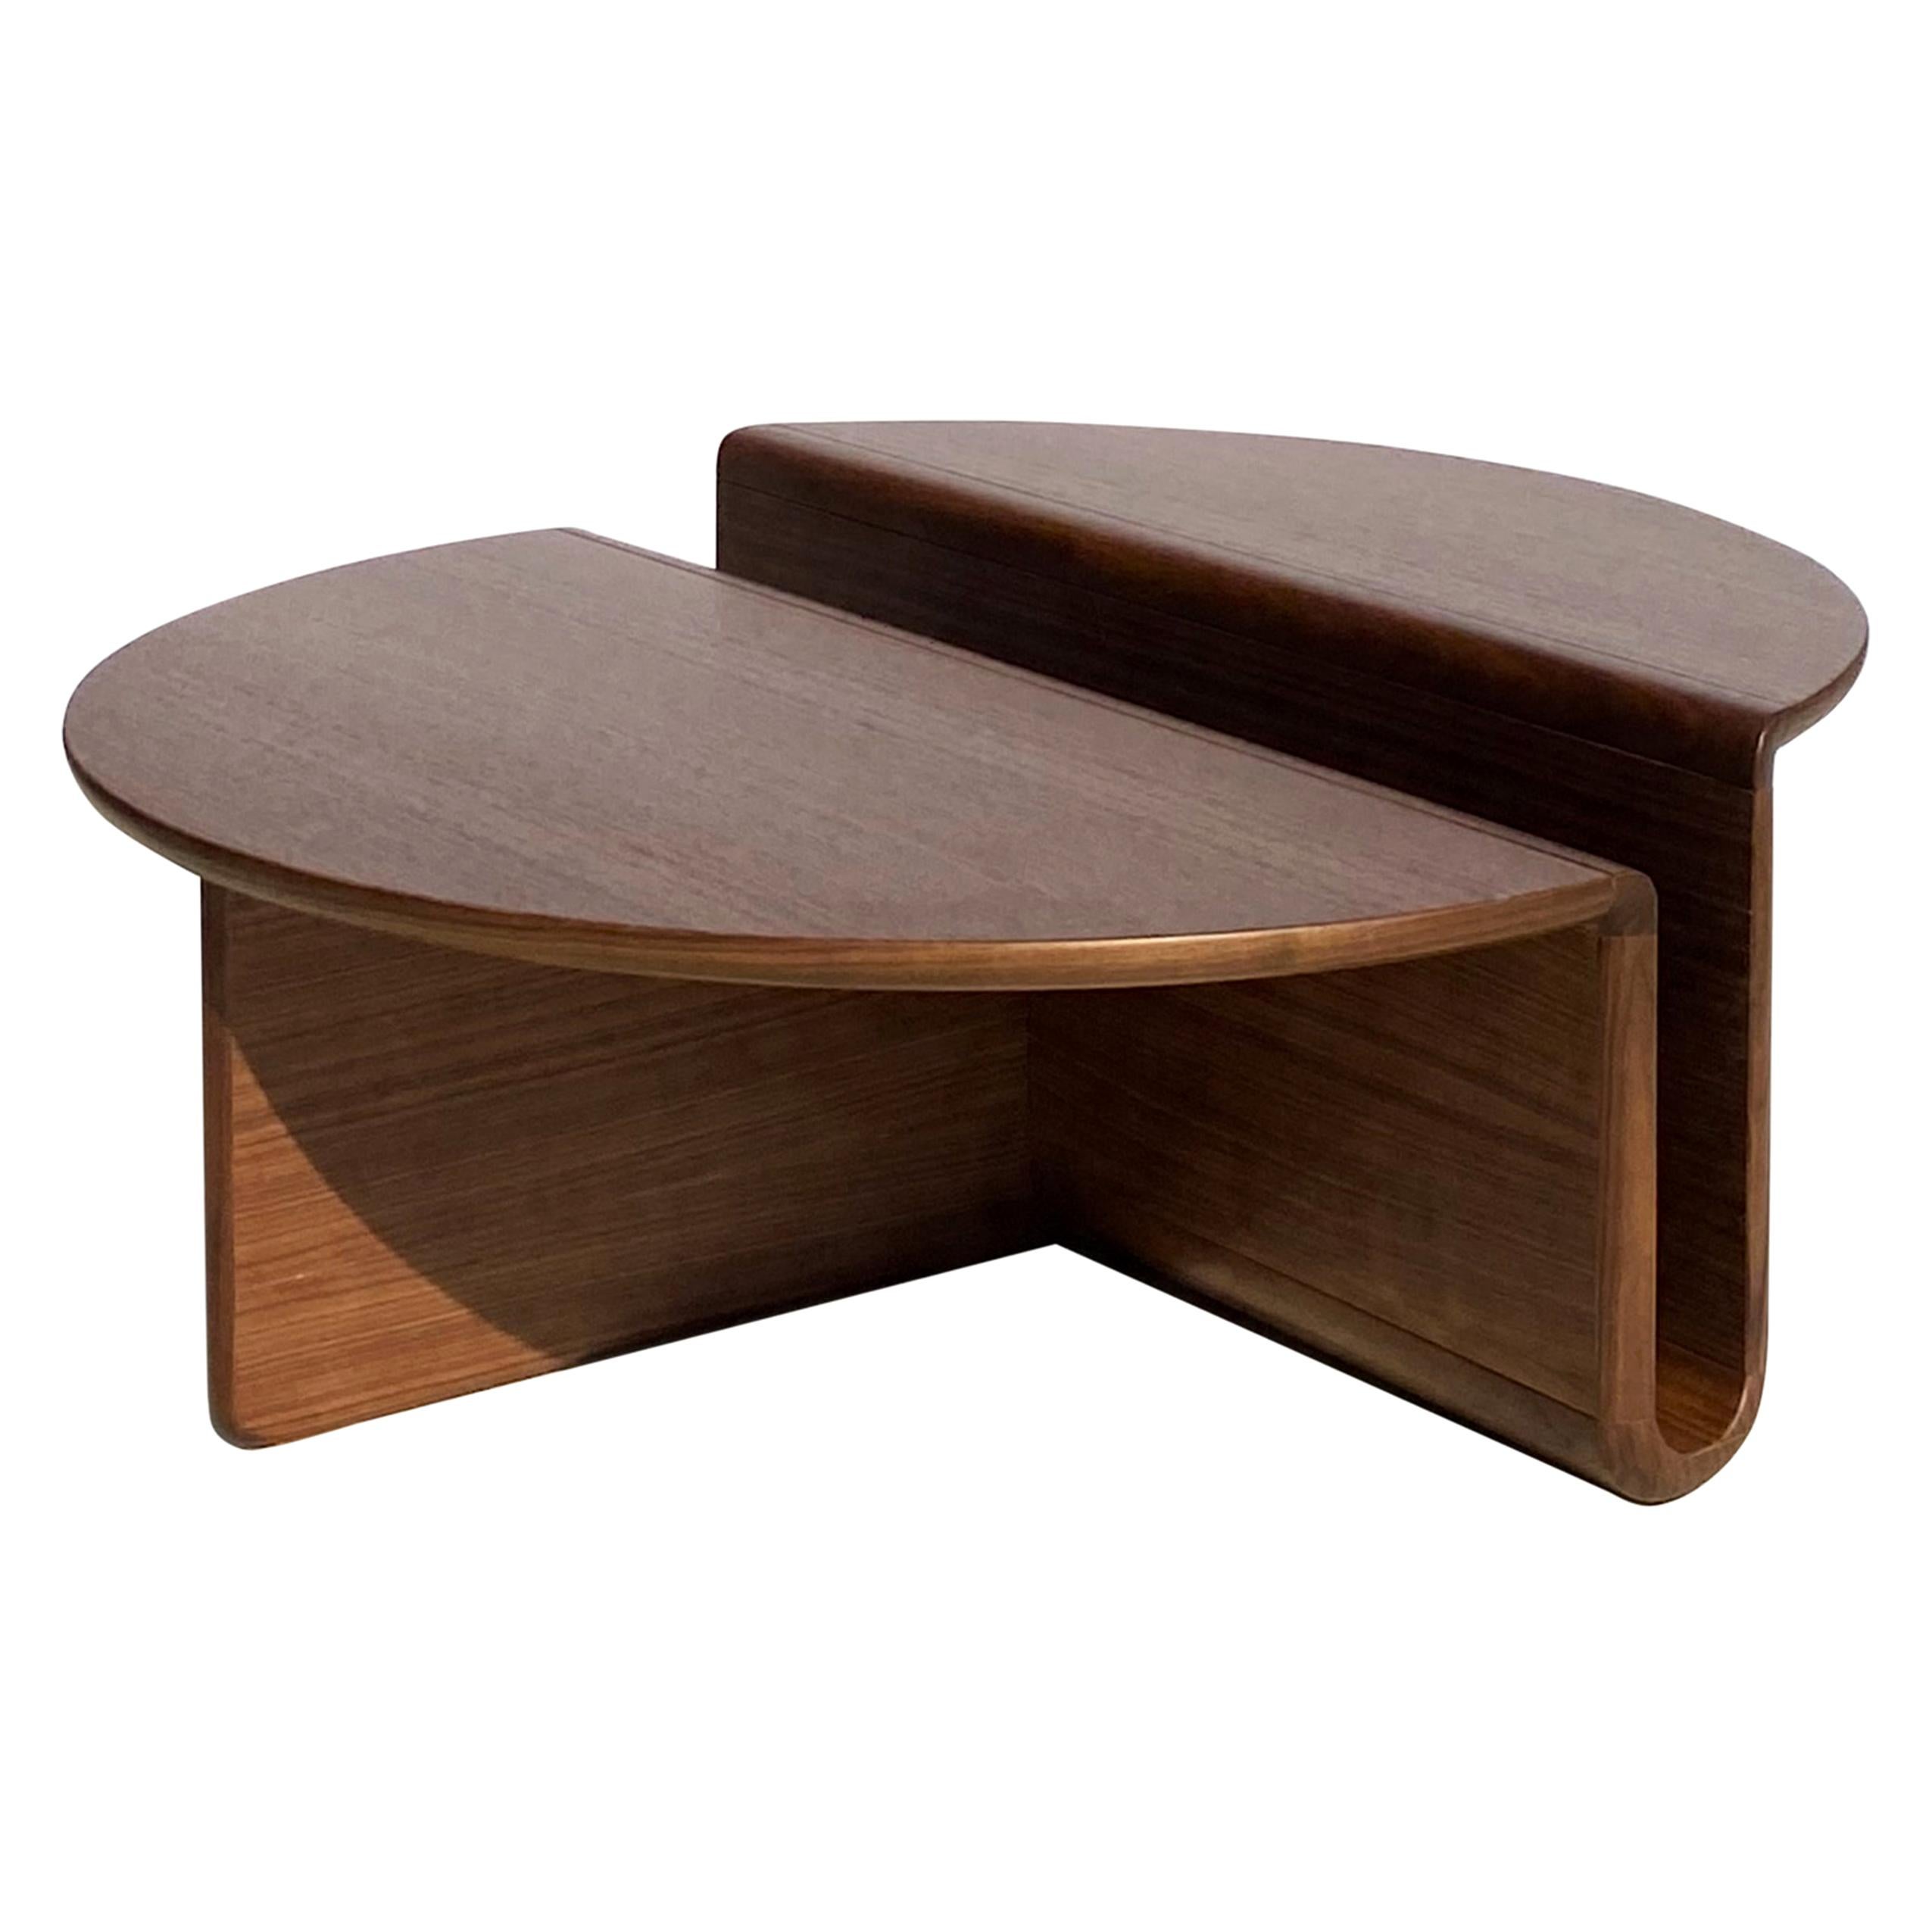 Kanyon Coffee Table, Contemporary Sculptural Minimalist Round Wooden Walnut